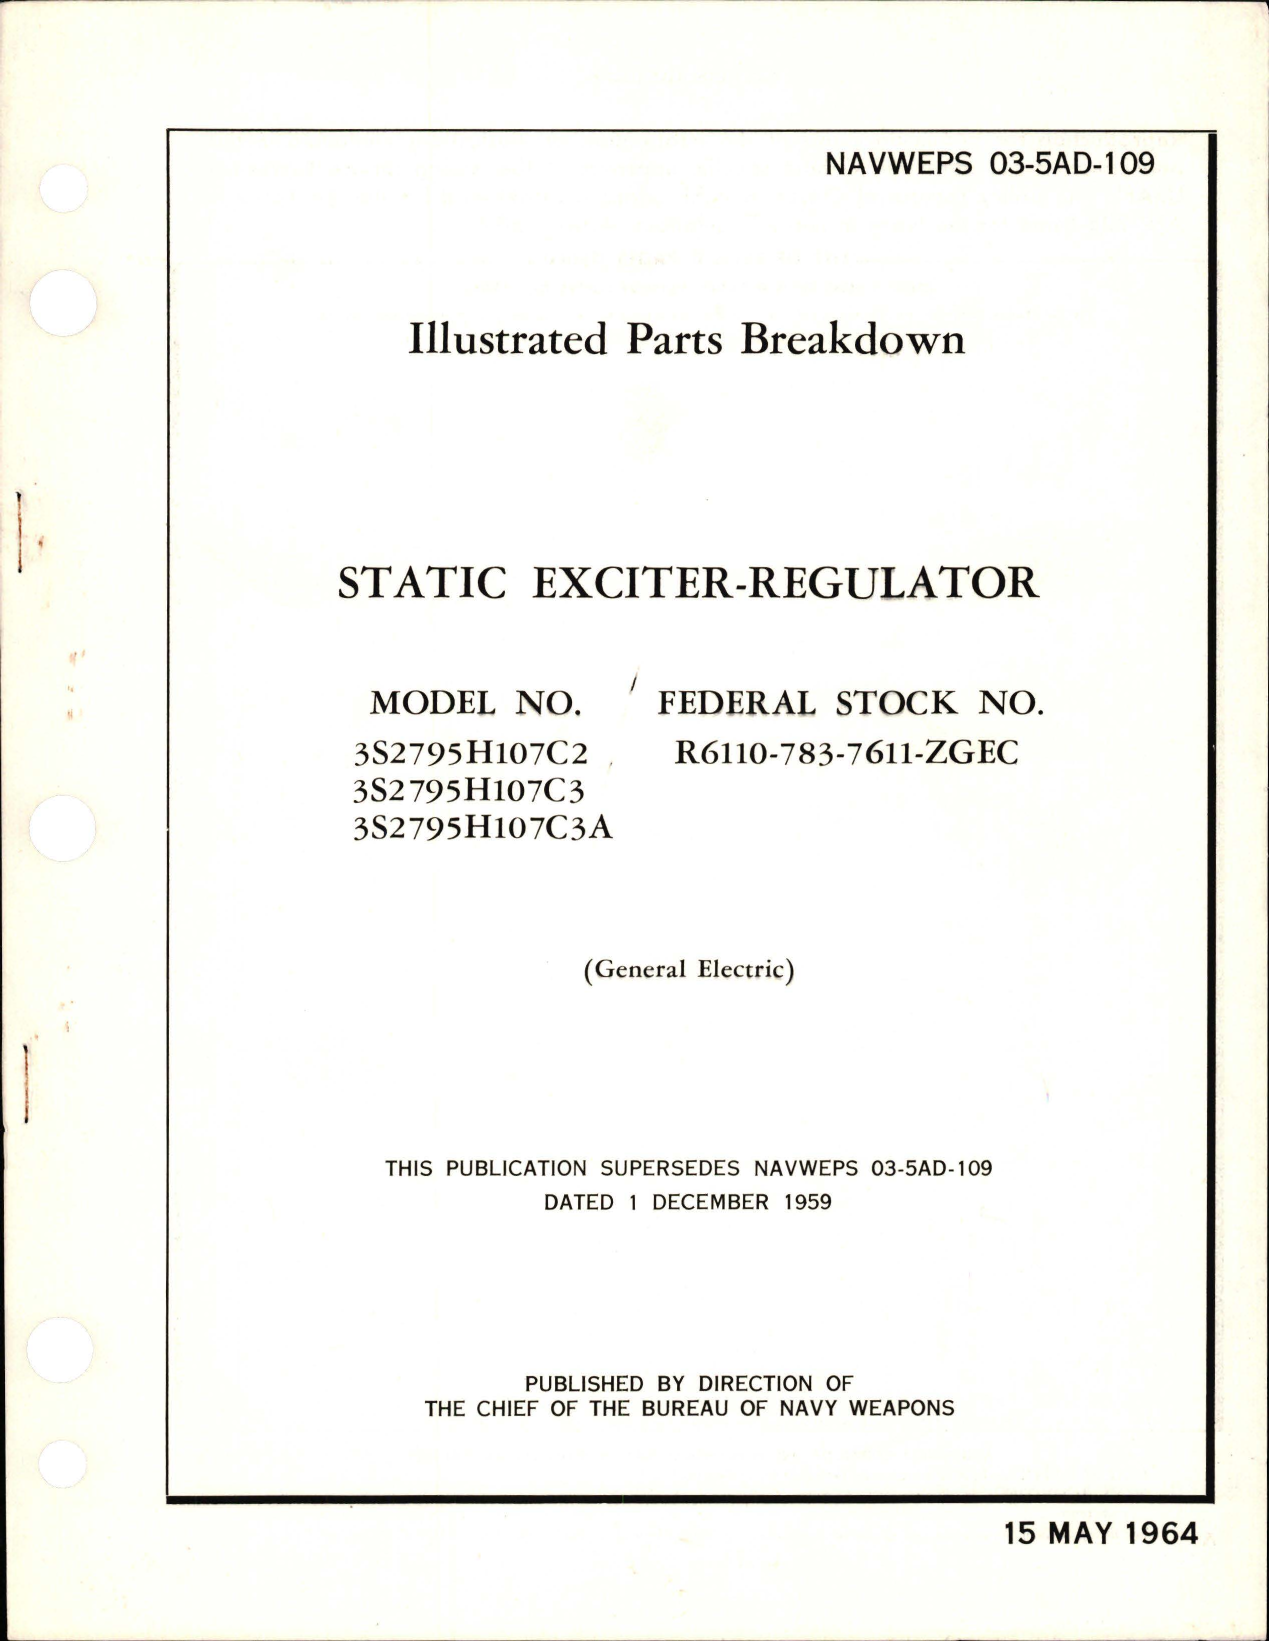 Sample page 1 from AirCorps Library document: Illustrated Parts Breakdown for Static Exciter Regulator - Models 3S2795H107C2, 3S2795H107C3, and 3S2795H107C3A 